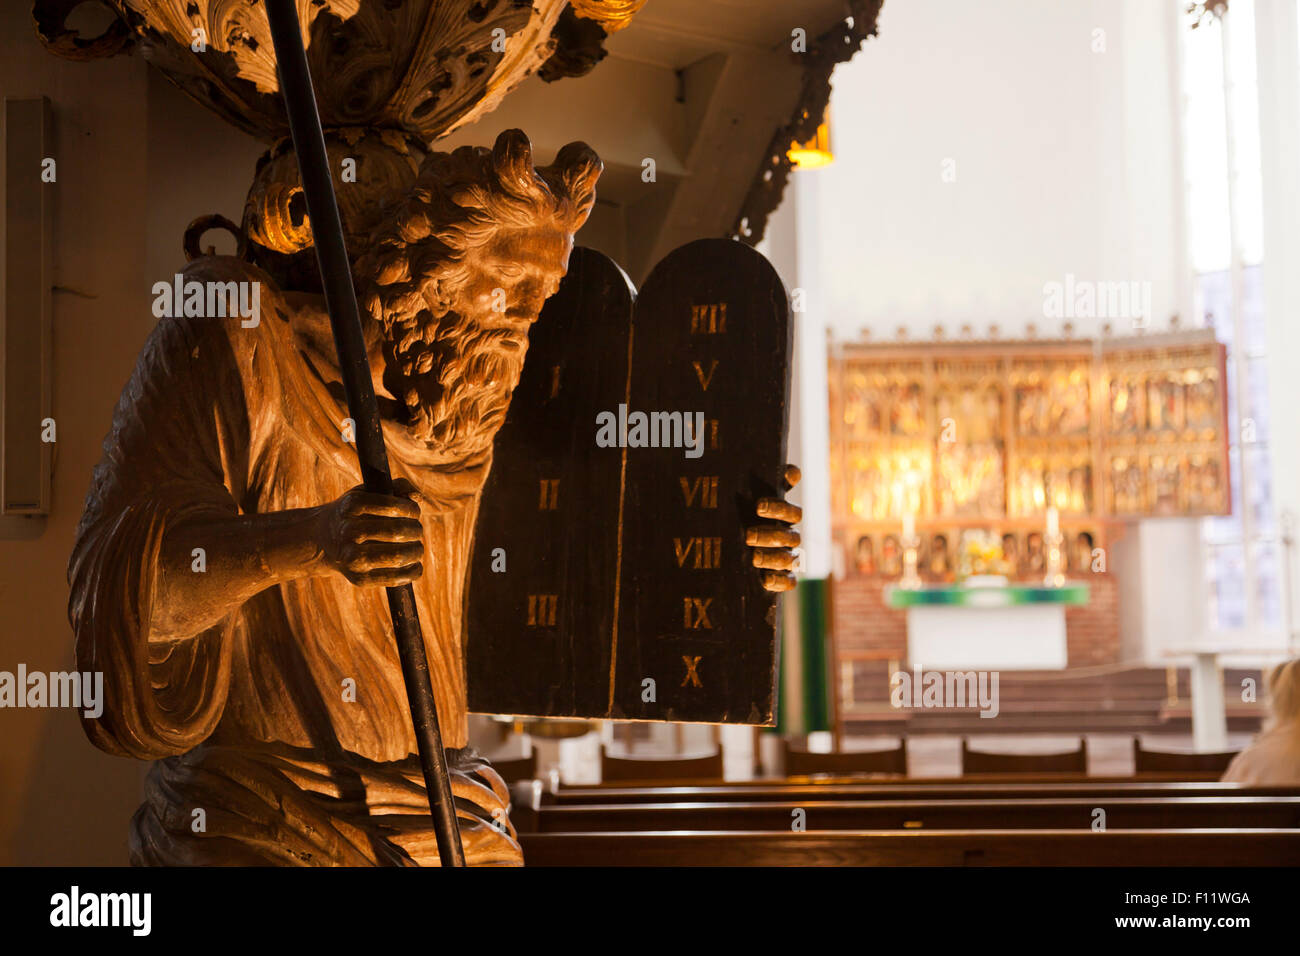 statue of Moses with the Ten Commandments and Winged altar in the Lutheran St. Nicholas Church, Kiel, Schleswig-Holstein, German Stock Photo